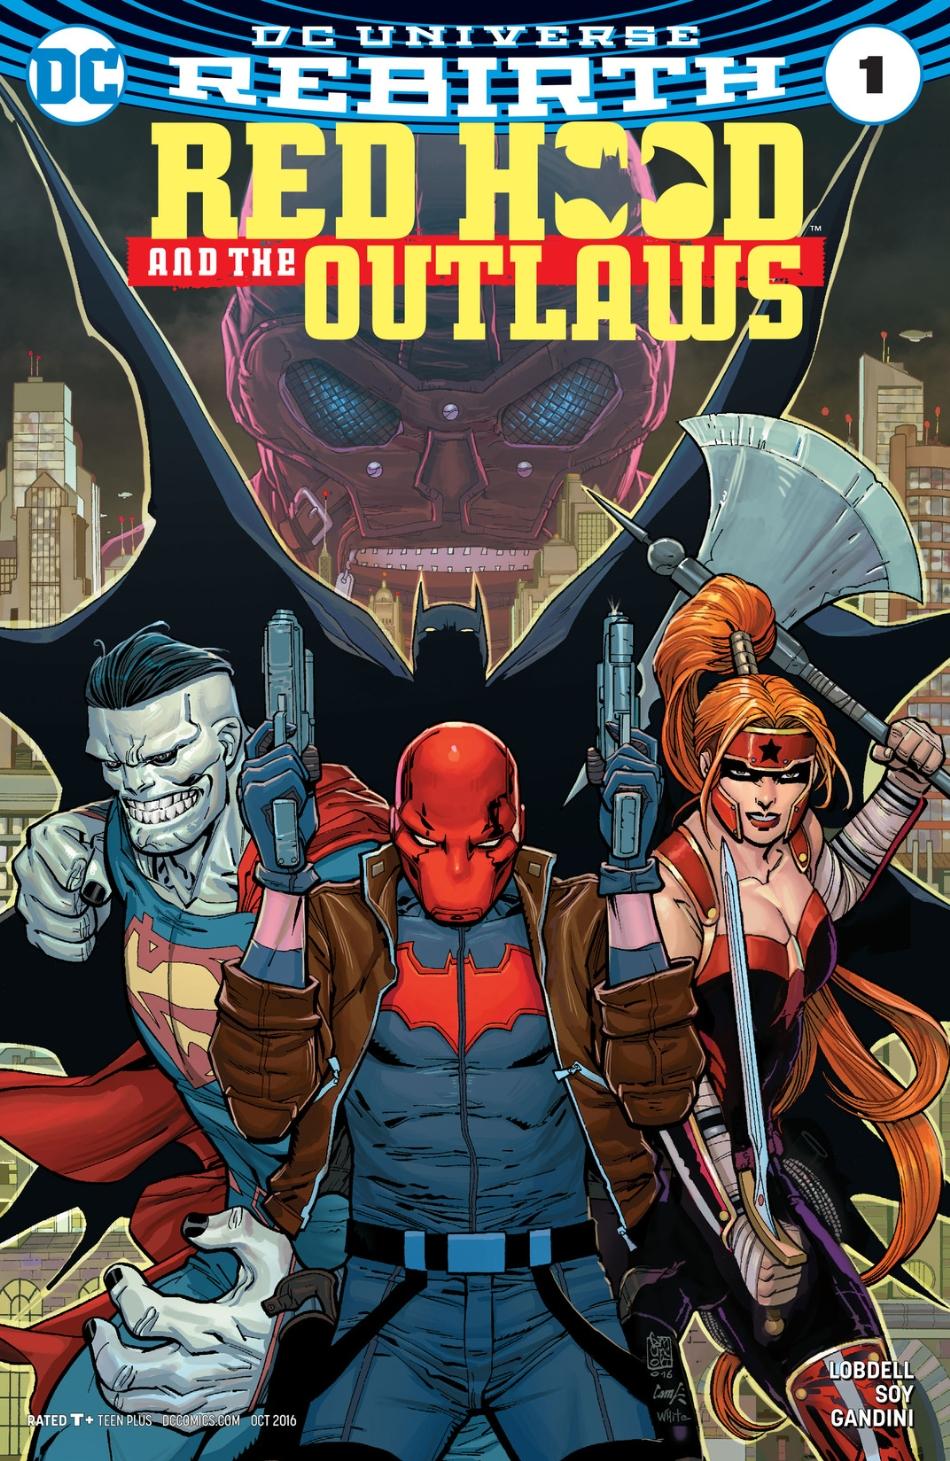 Red Hood and the Outlaws Vol. 2 #1